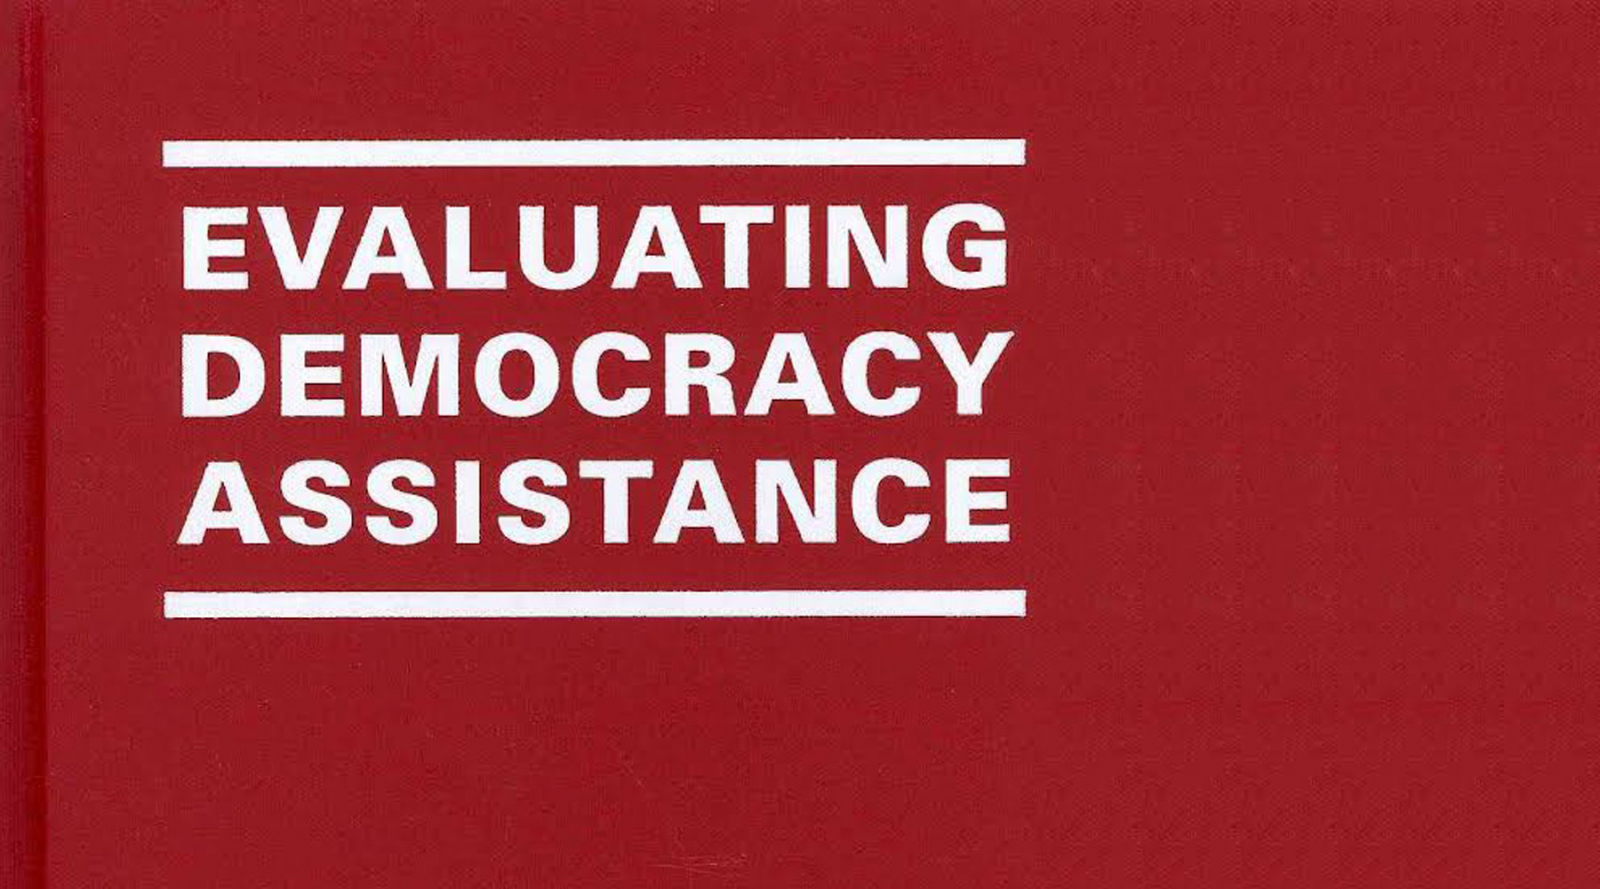 New Book Looks at Methods and Challenges of Evaluating Democracy Assistance